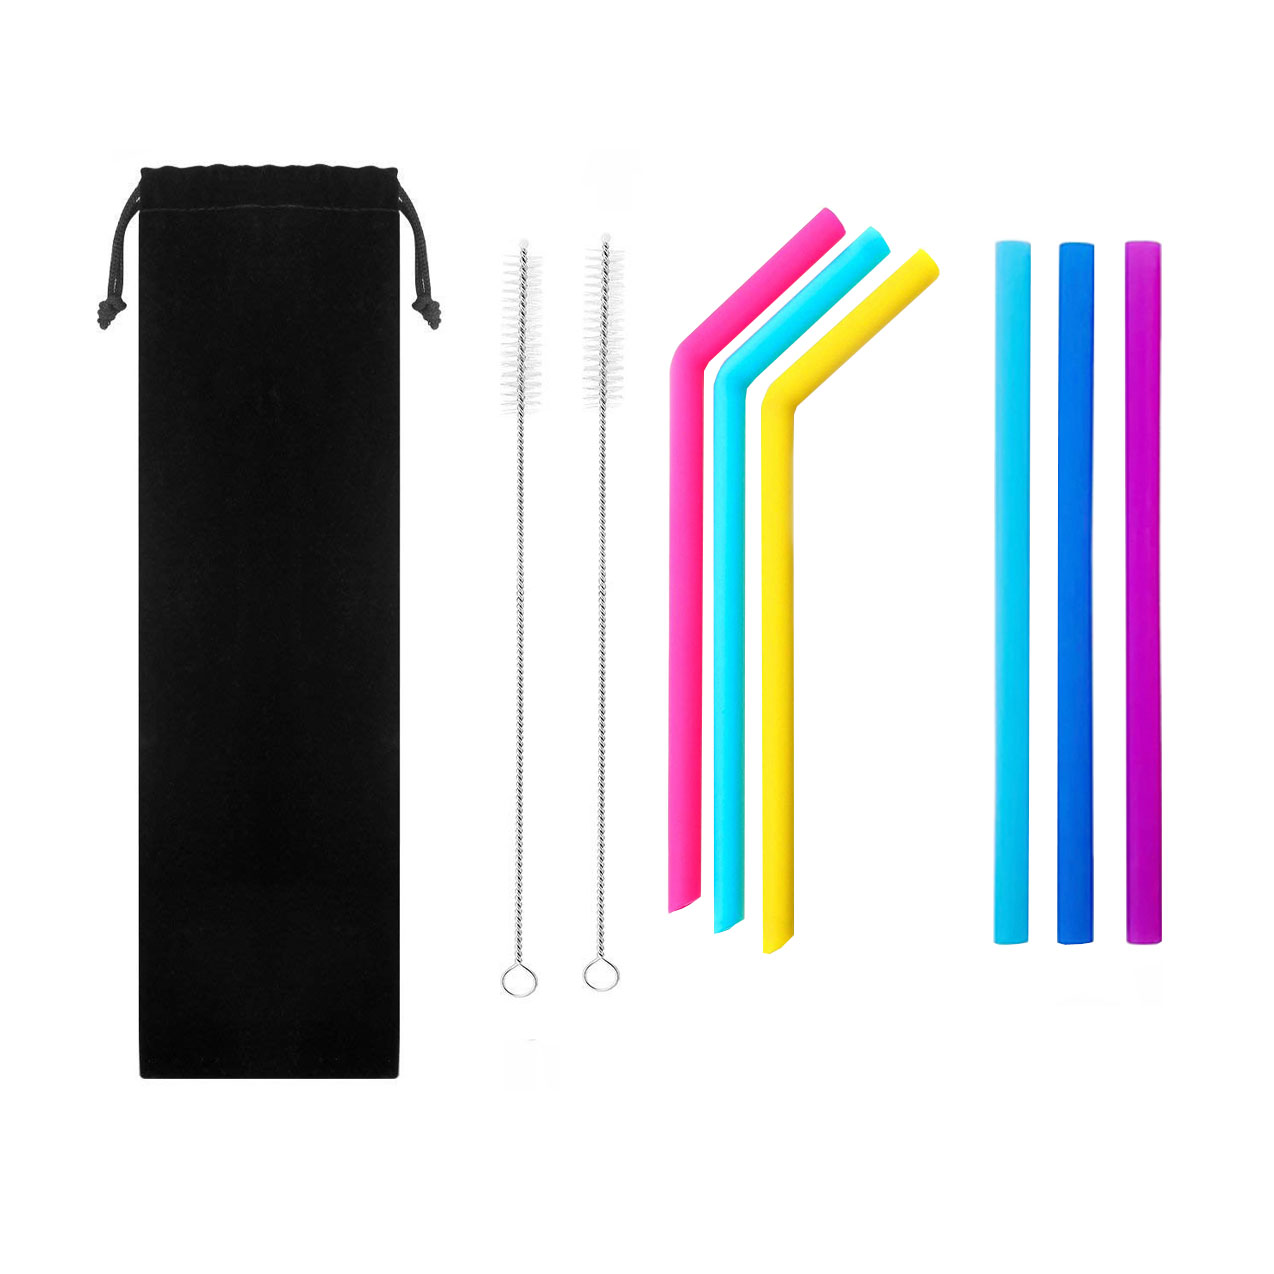 GL-AAJ1102 8 in 1 Silicone Drinking Bend Straw with Cleaning Brush